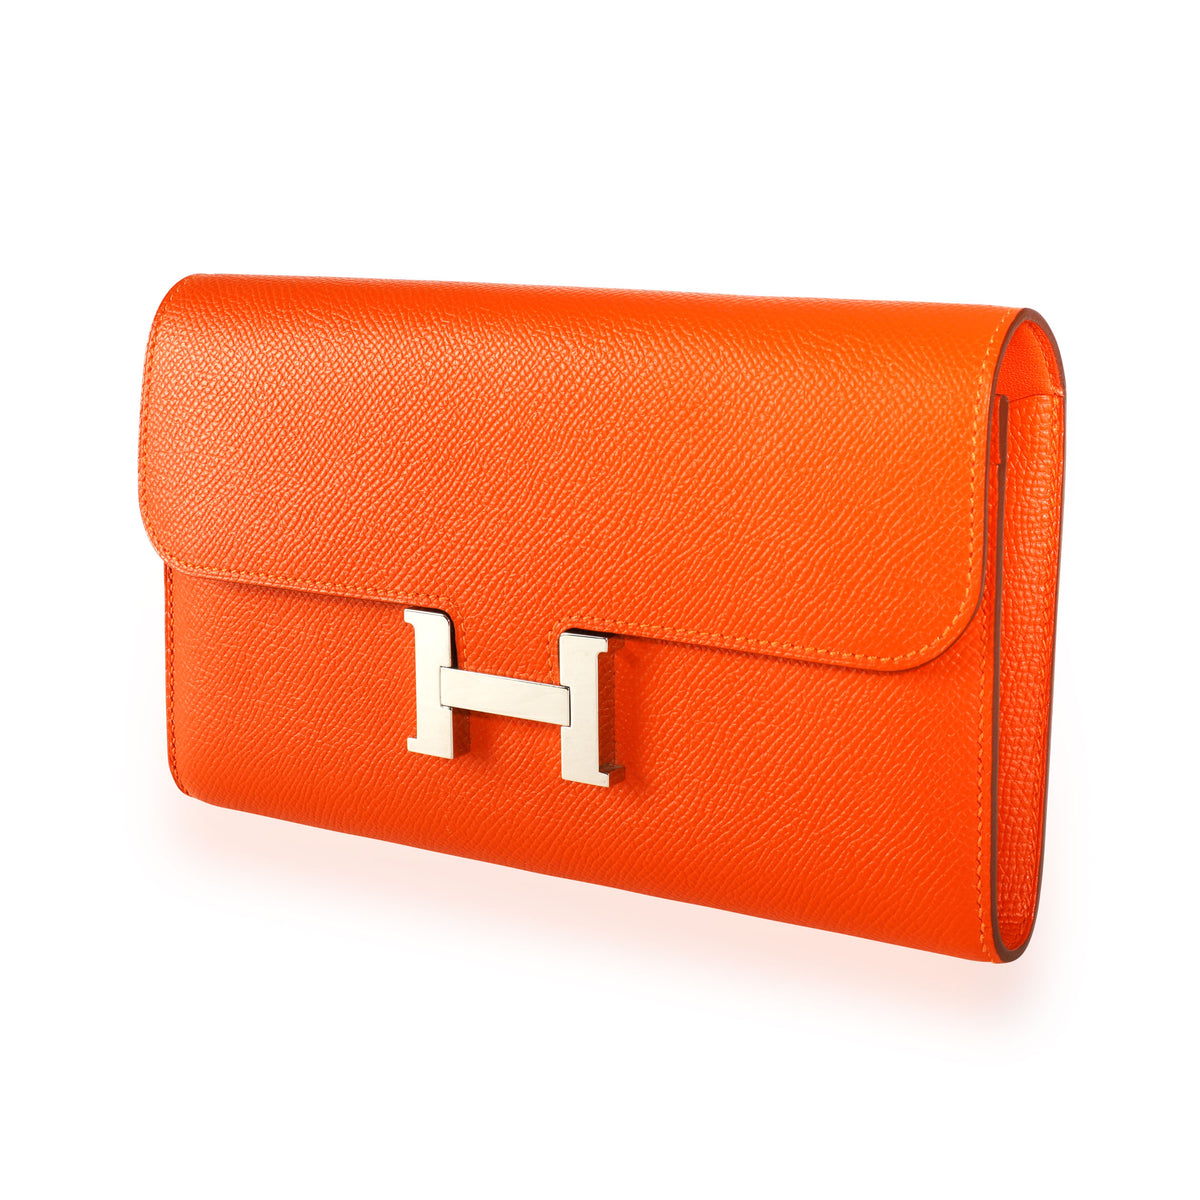 We Made a $5,000 Hermes Wallet for $70! 